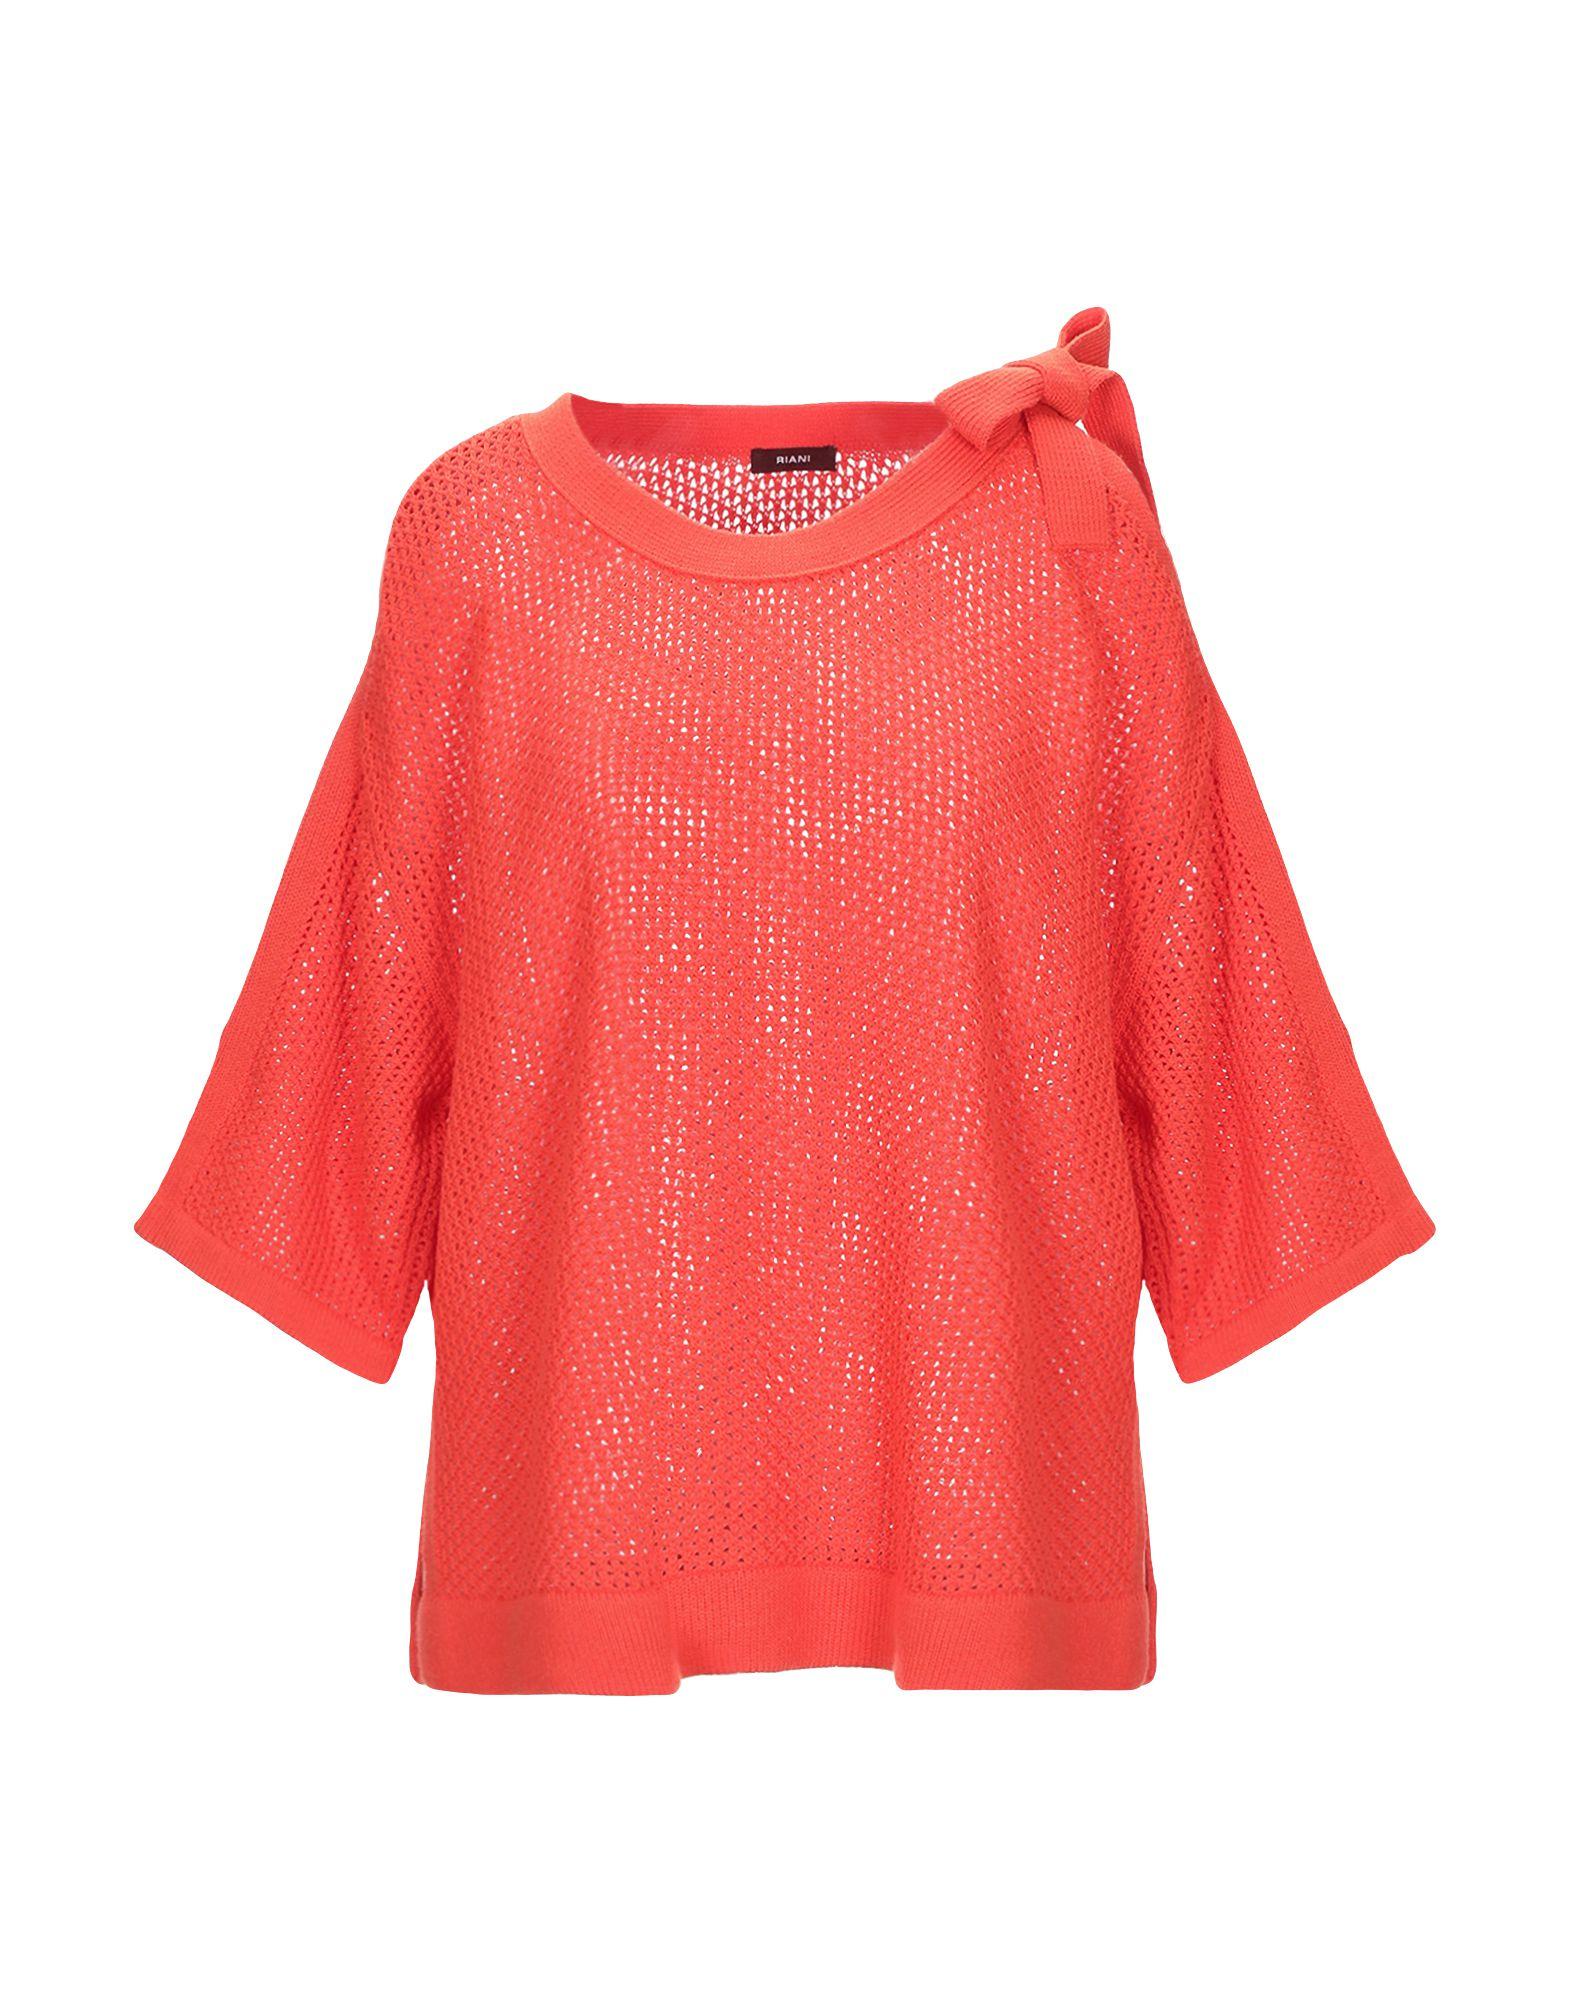 Riani Sweater in Coral (Red) - Lyst